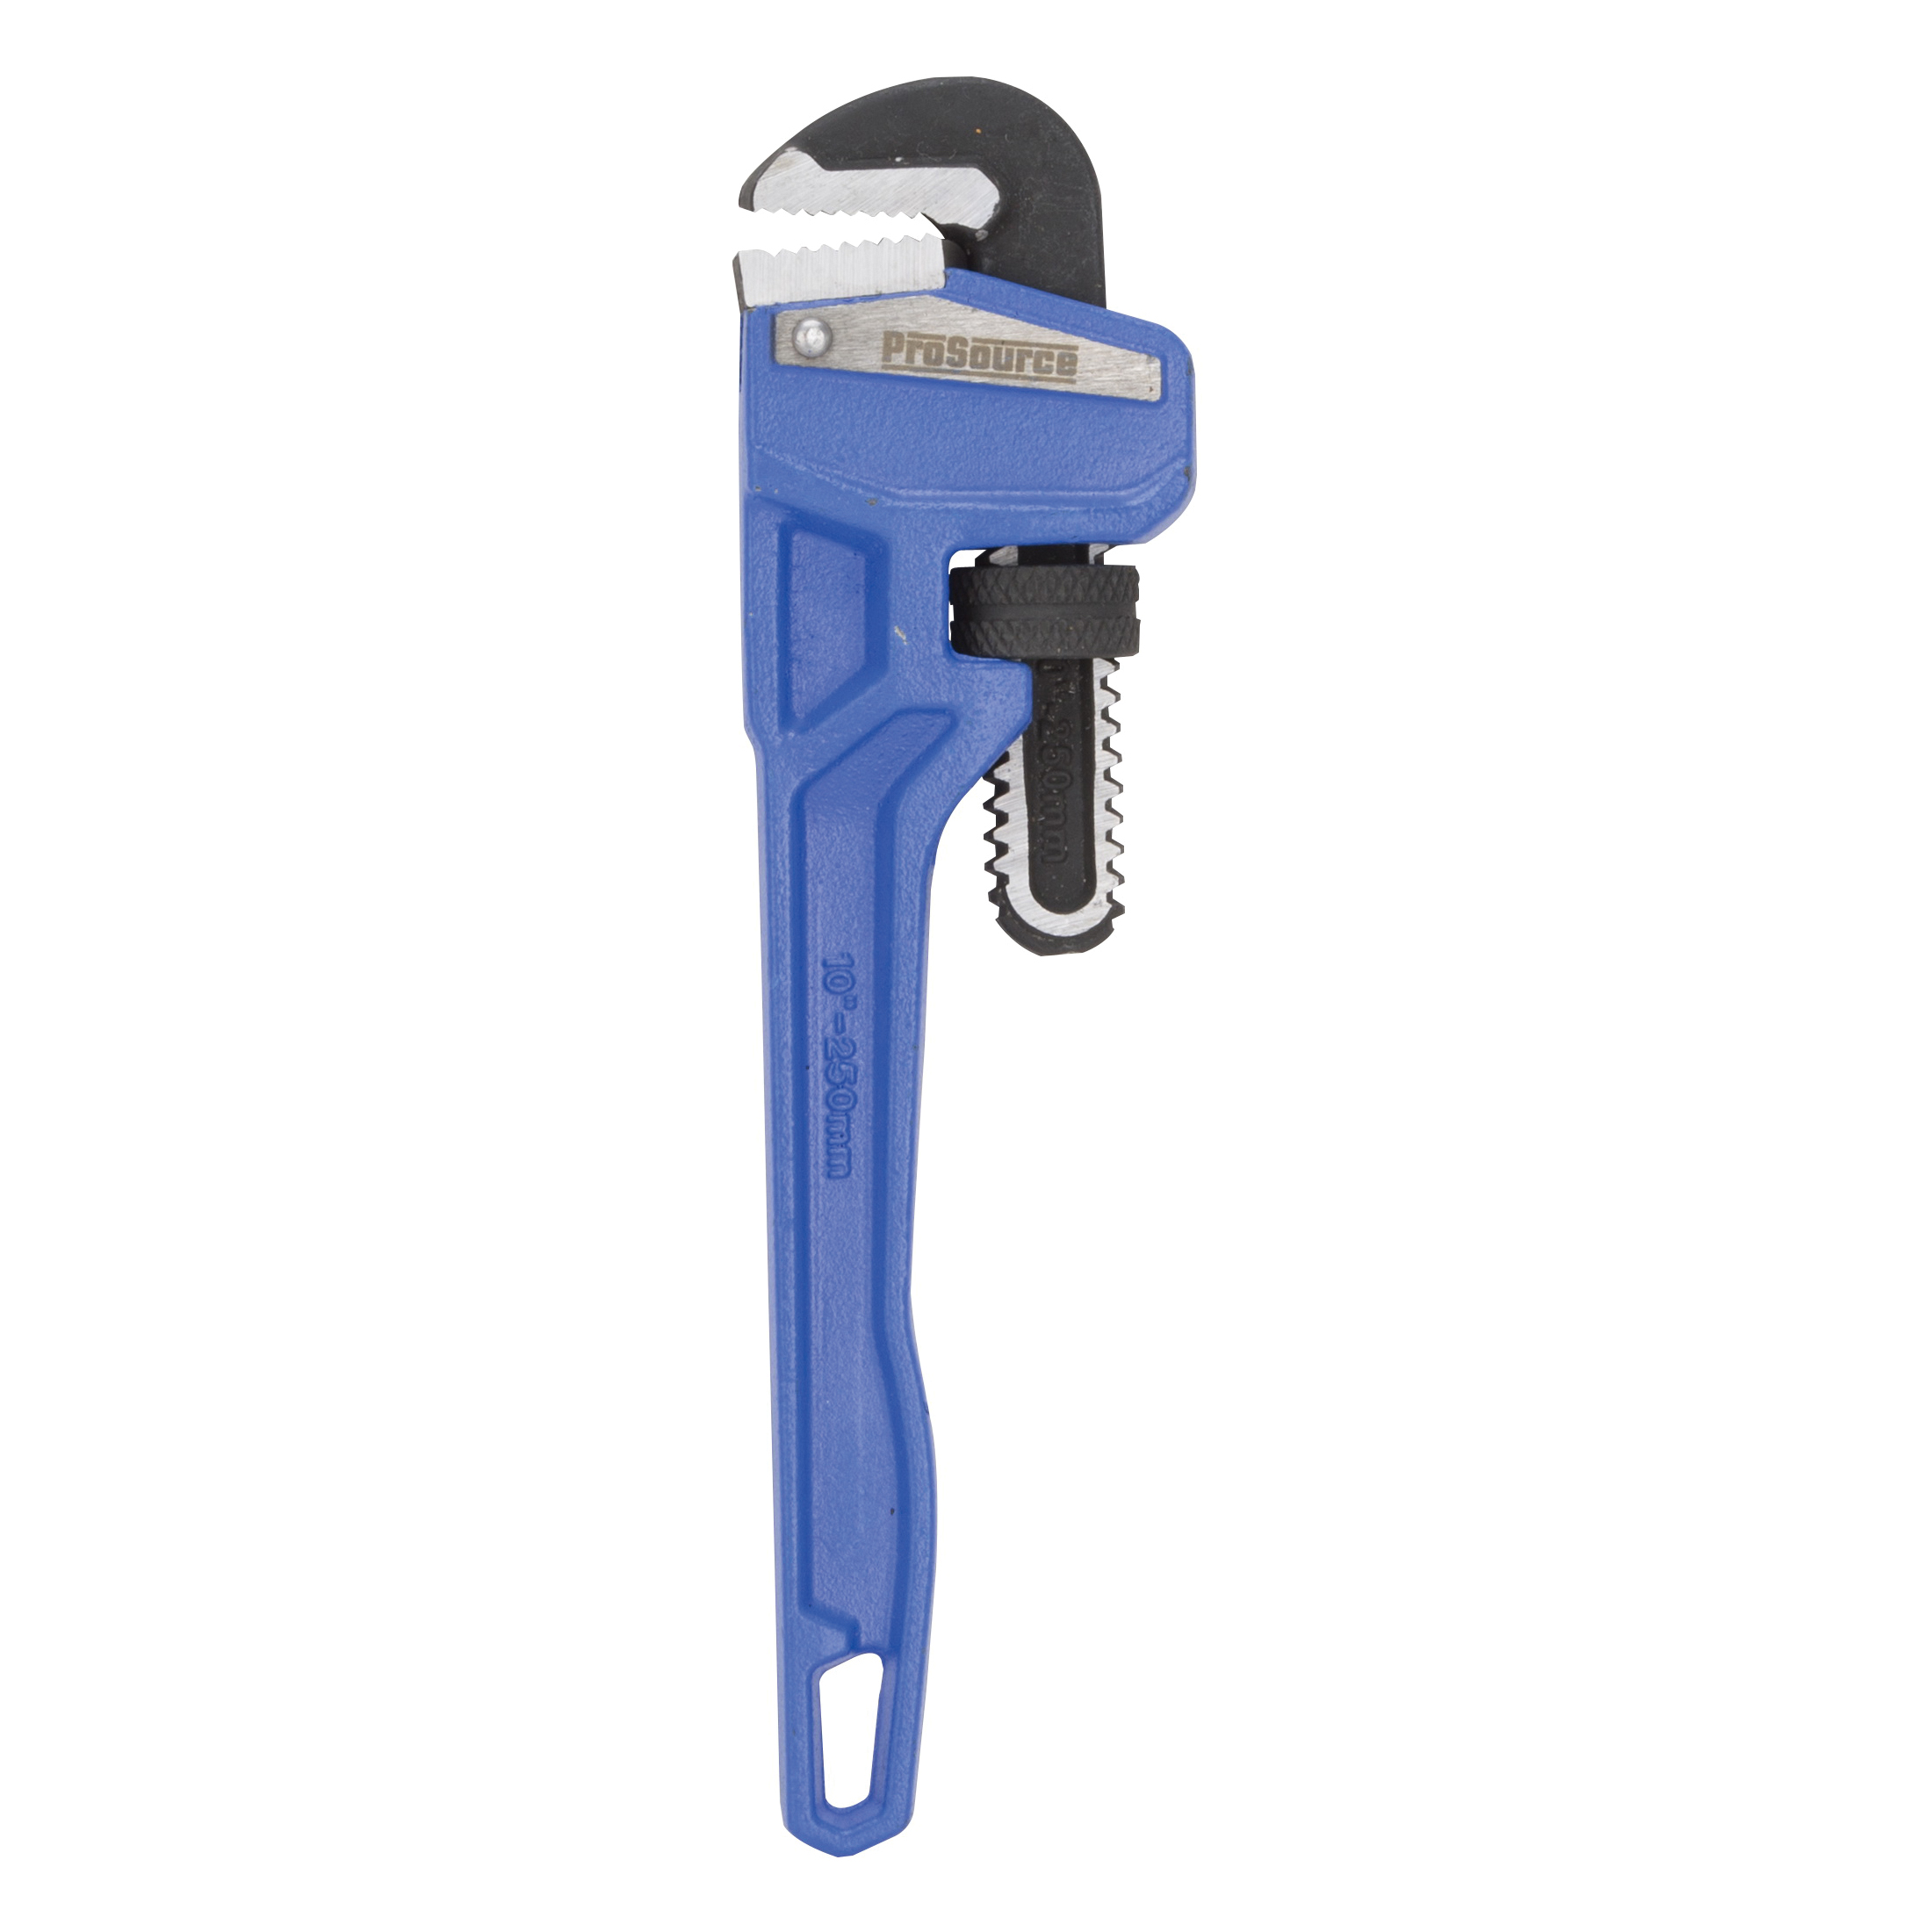 JL40110 Pipe Wrench, 25 mm Jaw, 10 in L, Serrated Jaw, Die-Cast Carbon Steel, Powder-Coated, Heavy-Duty Handle